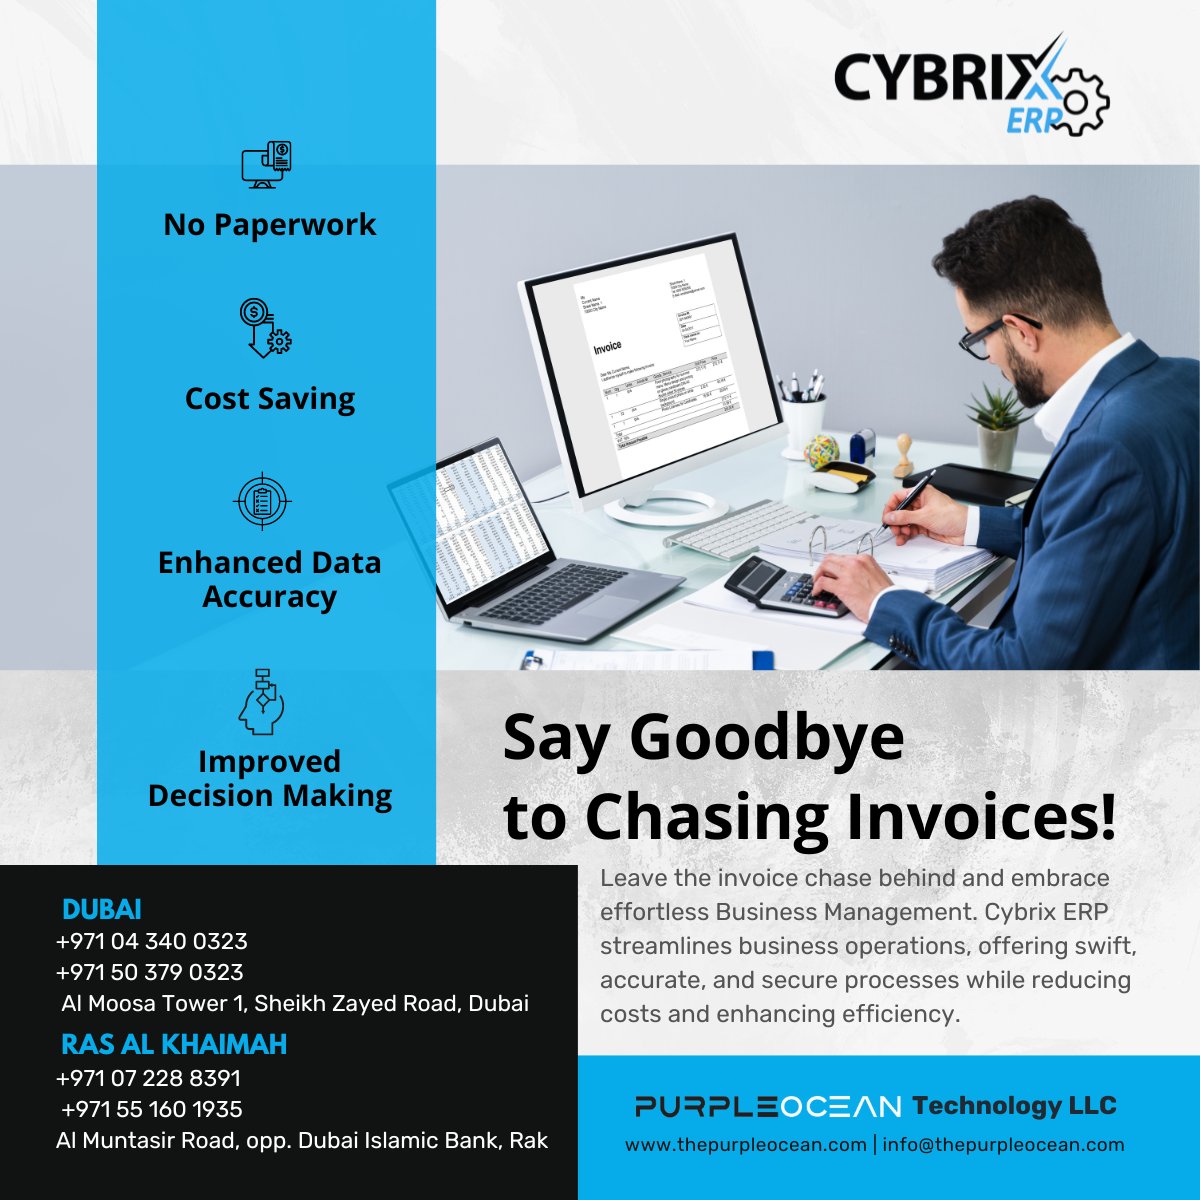 #Cybrix #ERP streamlines business operations, offering swift, accurate, and secure processes while reducing costs and enhancing efficiency.

#purpleoceantechnology #cybrix #cybrixpos #cybrixerp #ERPSoftware #ERPSolution #software #business  #dubai #uae #abudhabi